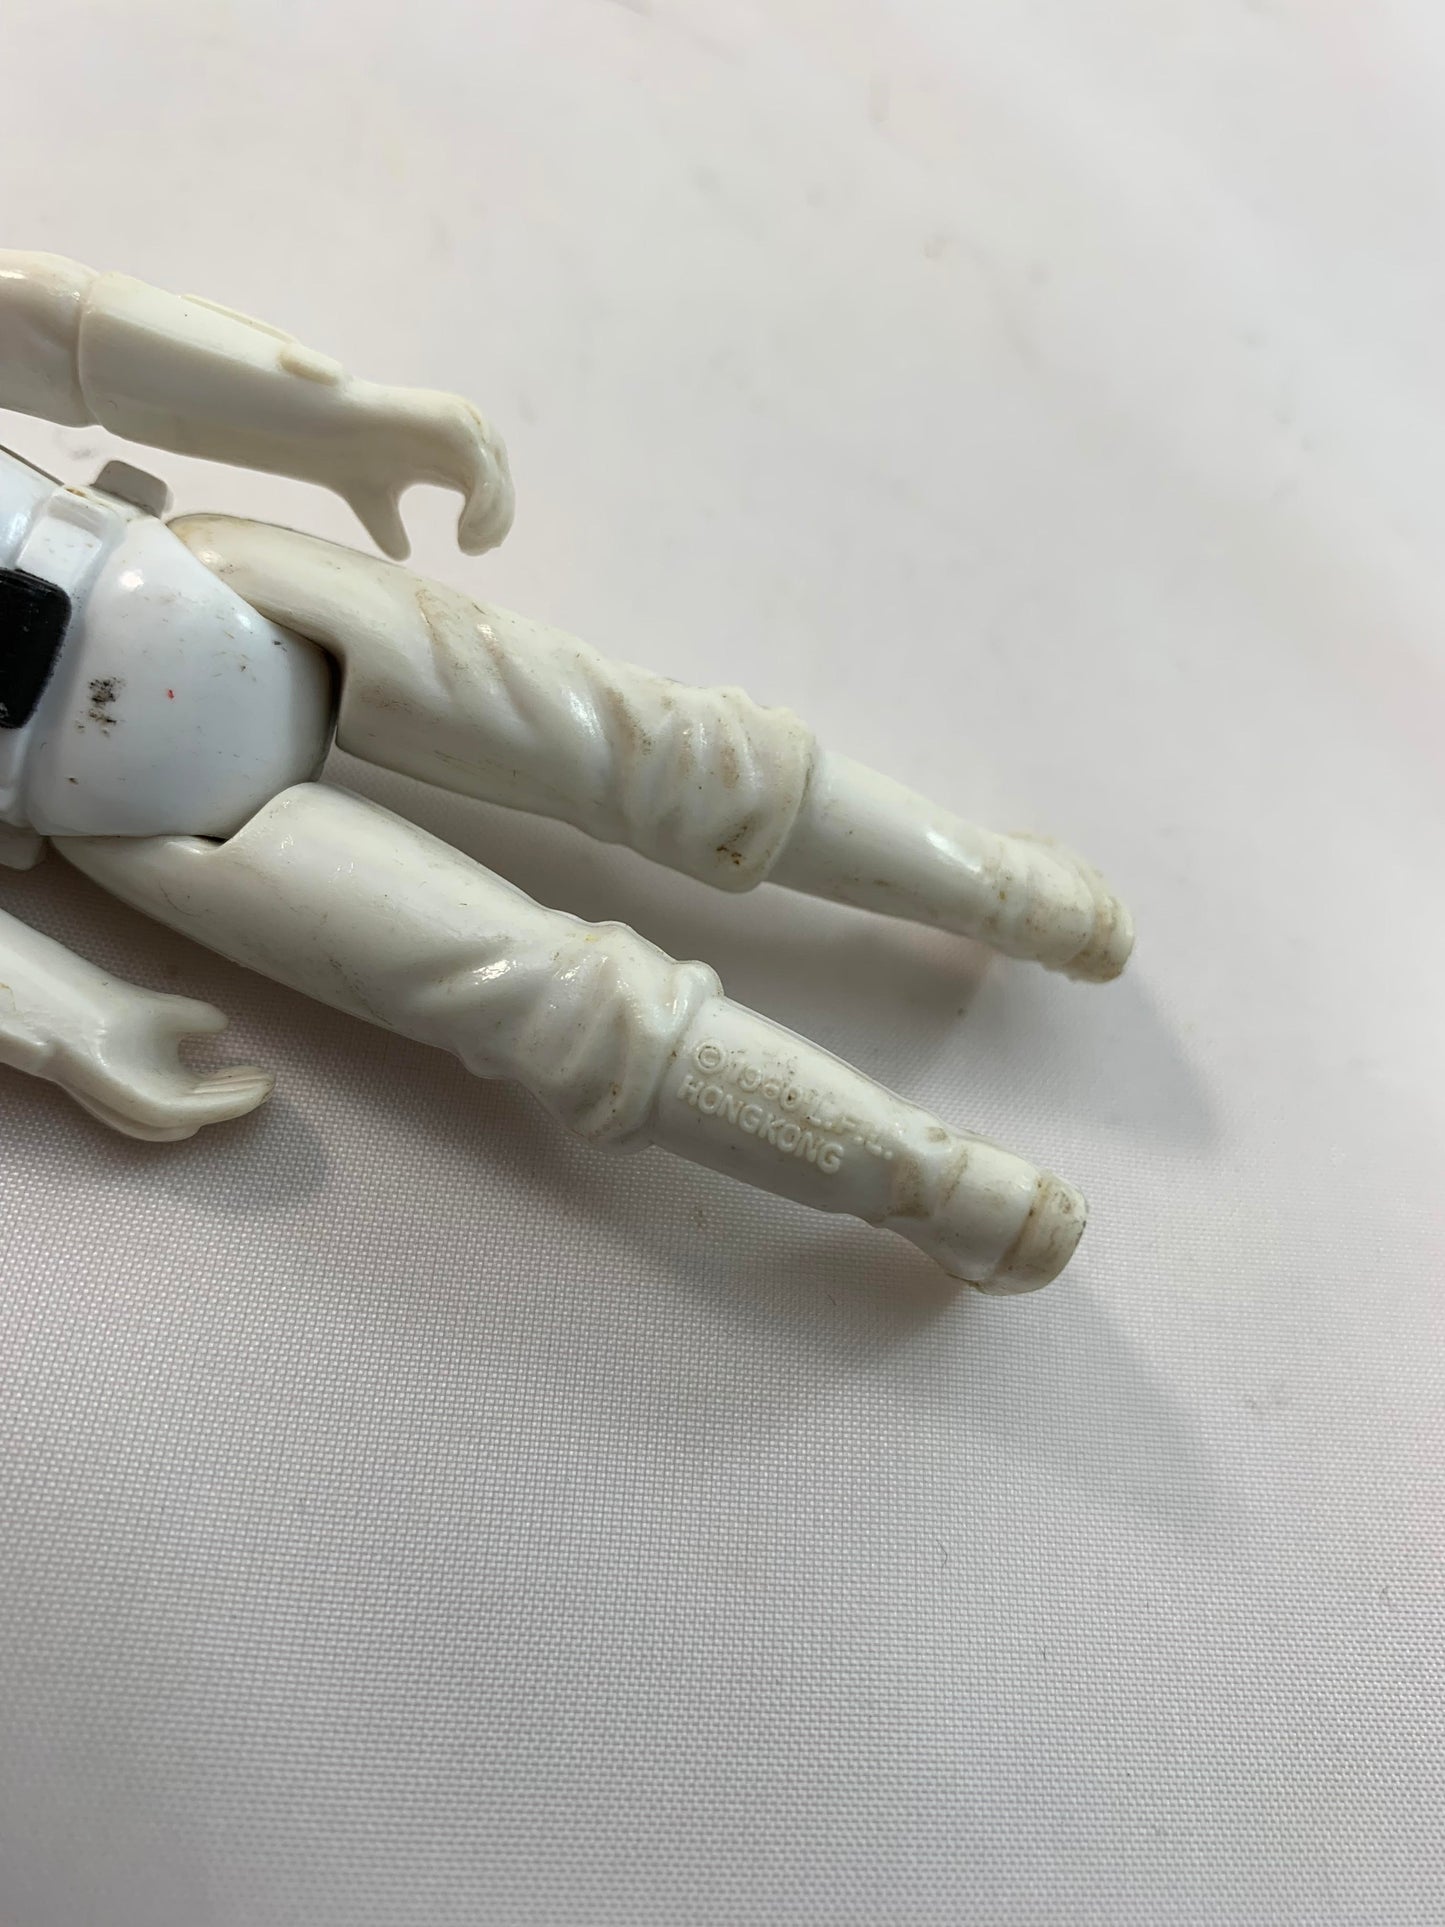 Kenner Vintage Star Wars TESB: The Empire Strikes Back IMPERIAL STORMTROOPER / SNOWTROOPER (Hoth Battle Gear) - COO LFL 1980 Hong Kong - Loose